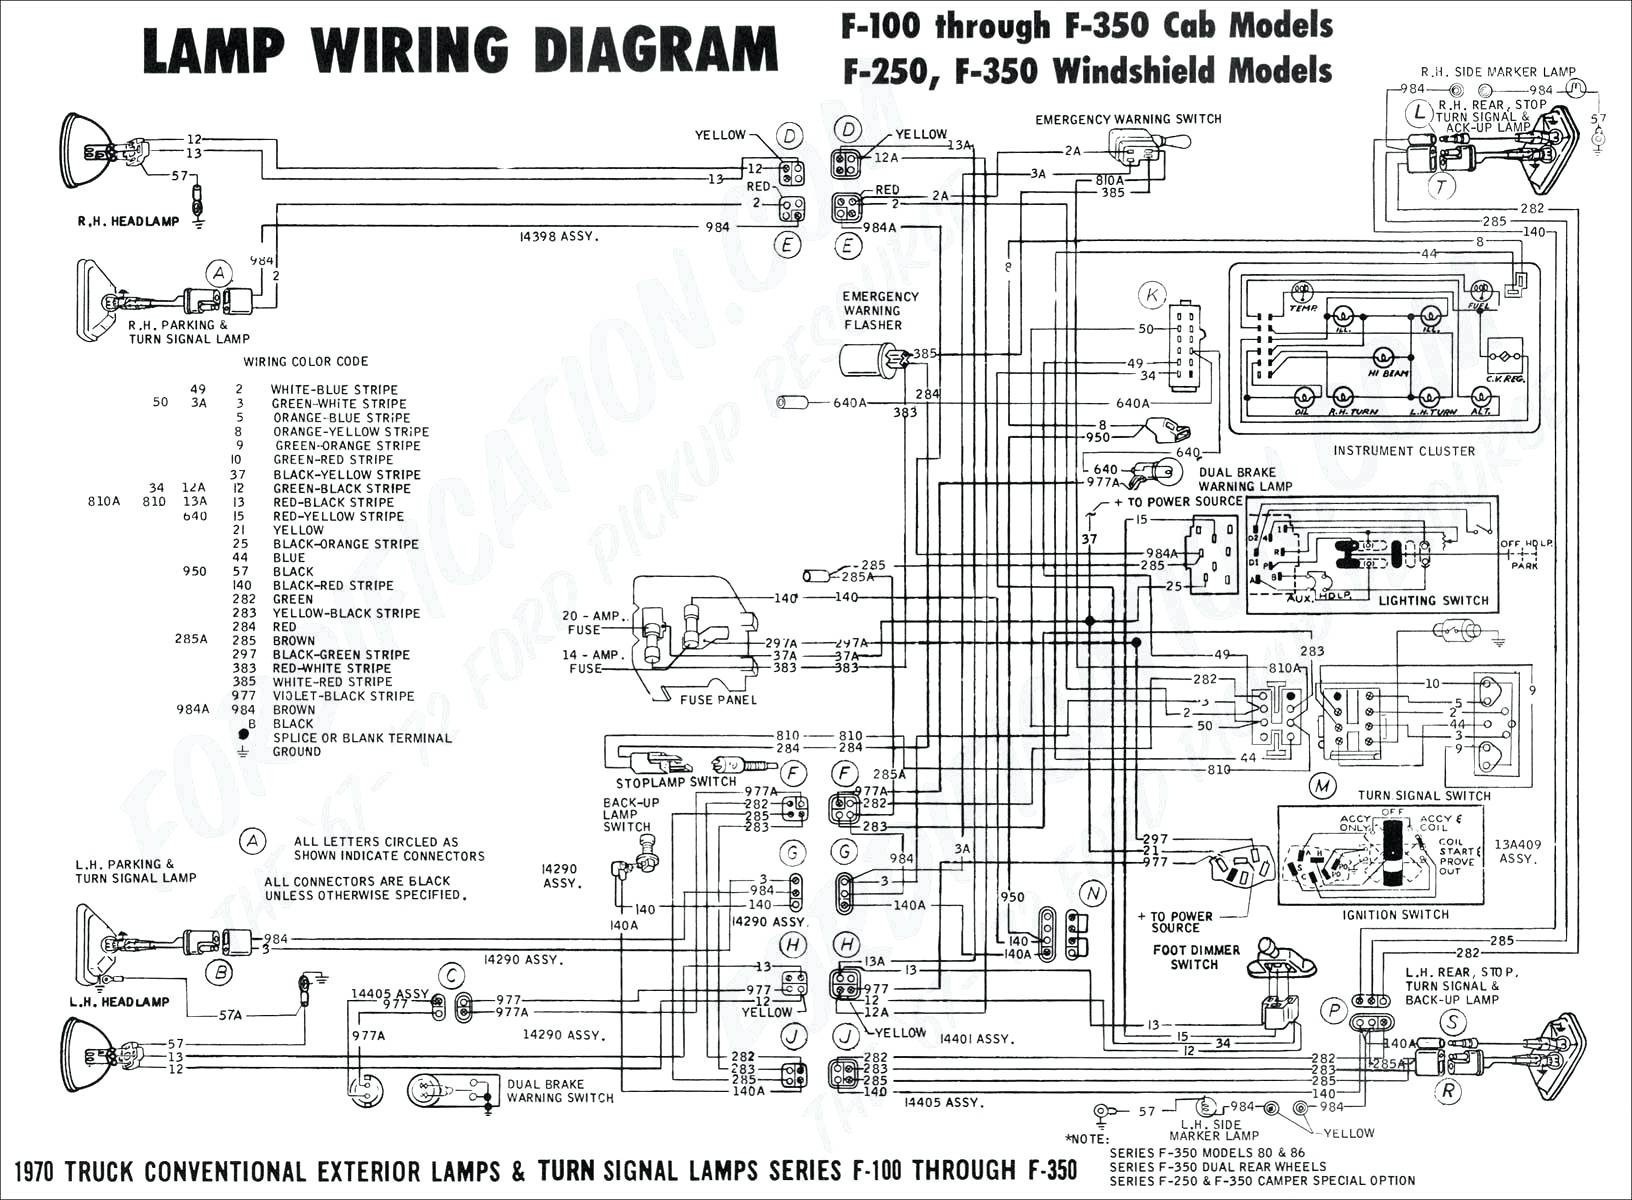 Motorcycle Wiring Diagrams Light Shelf Diagram New Eugrab – Wiring Diagram Sample and Charts Of Motorcycle Wiring Diagrams